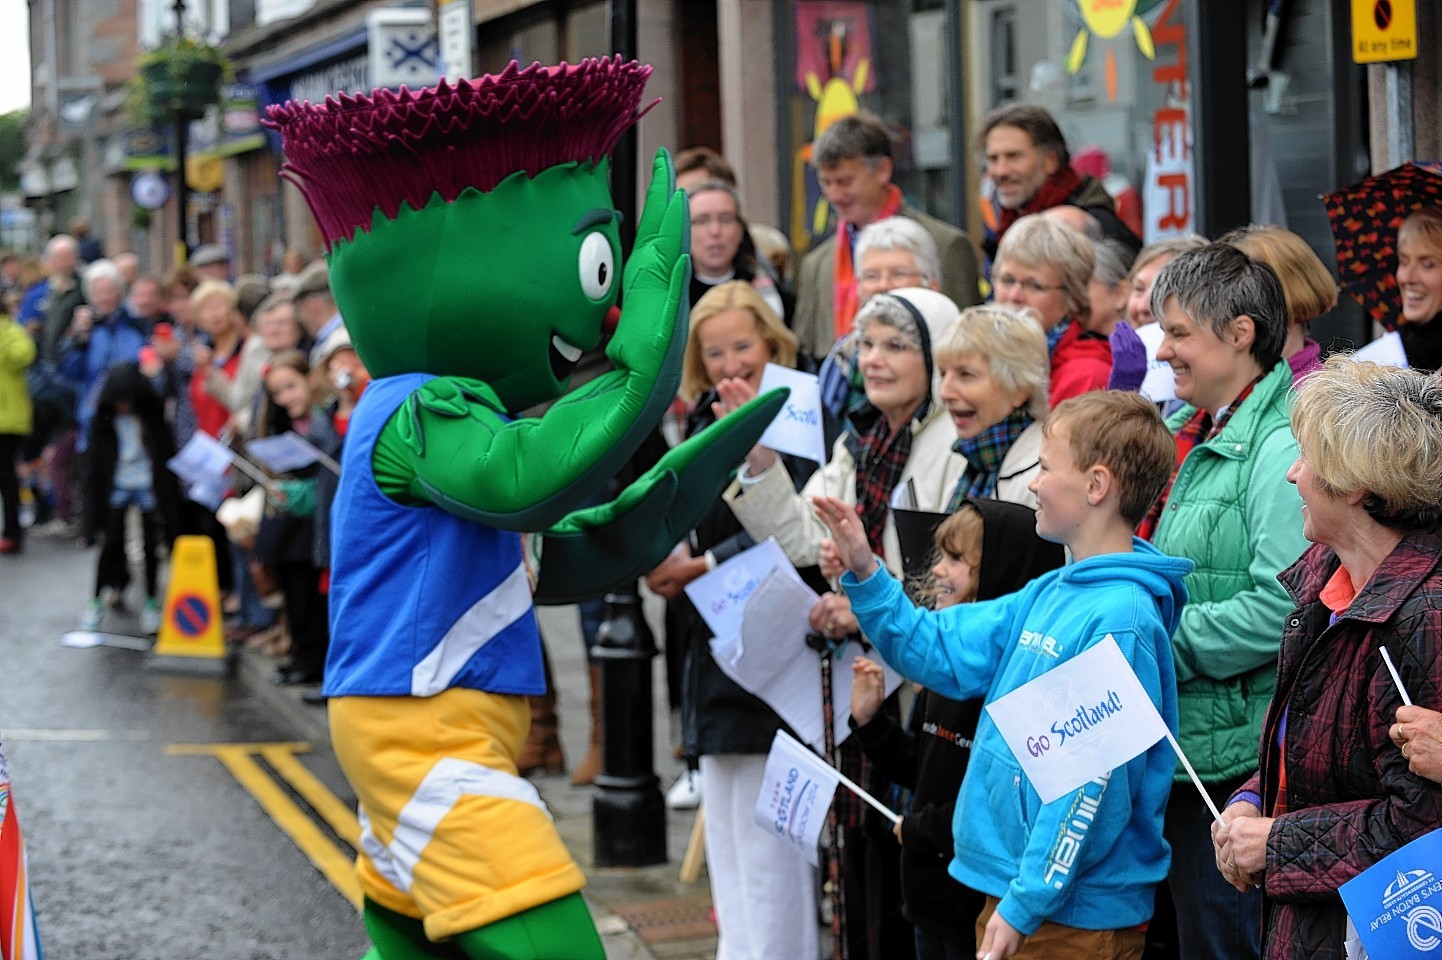 Clyde, the Commonwealth Games Mascot in Banchory